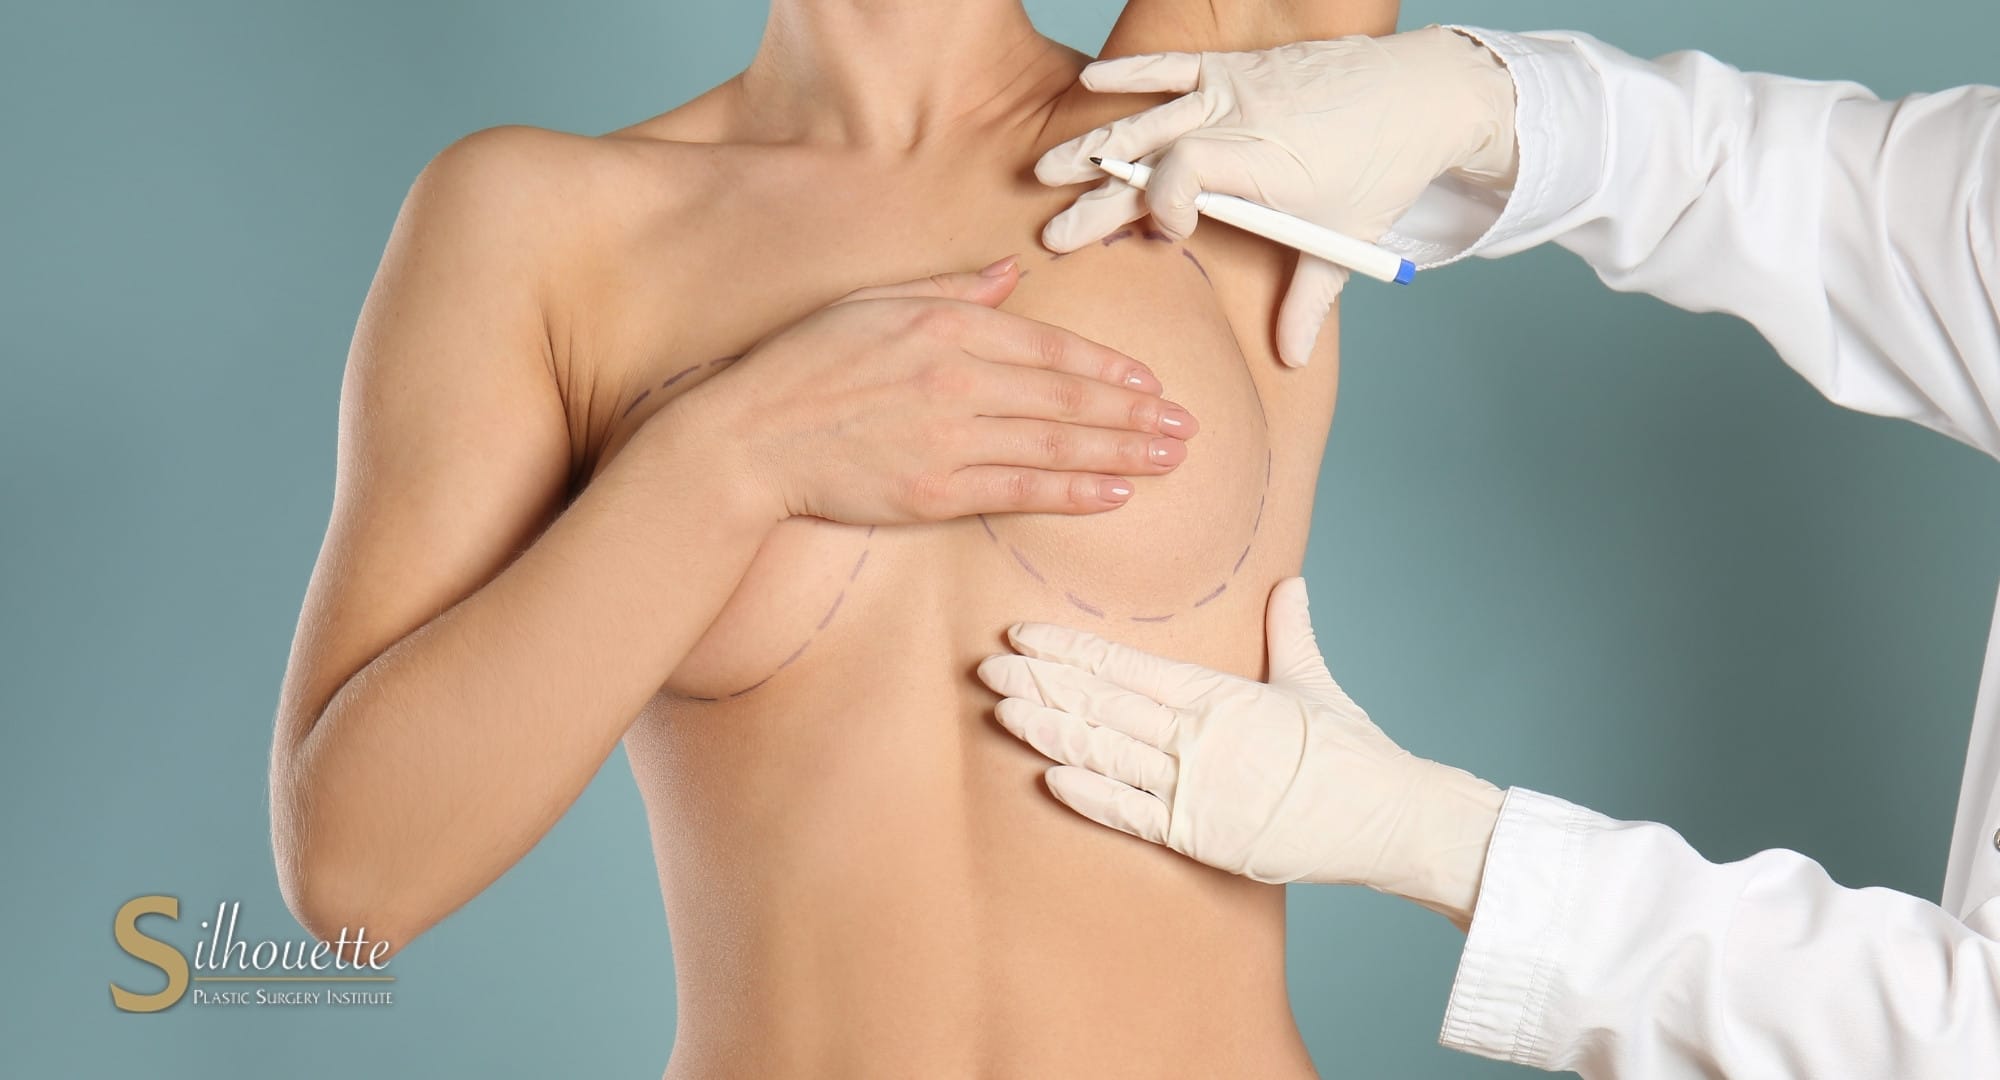 Your Ultimate Guide to Getting Back on Your Feet: Breast Reduction